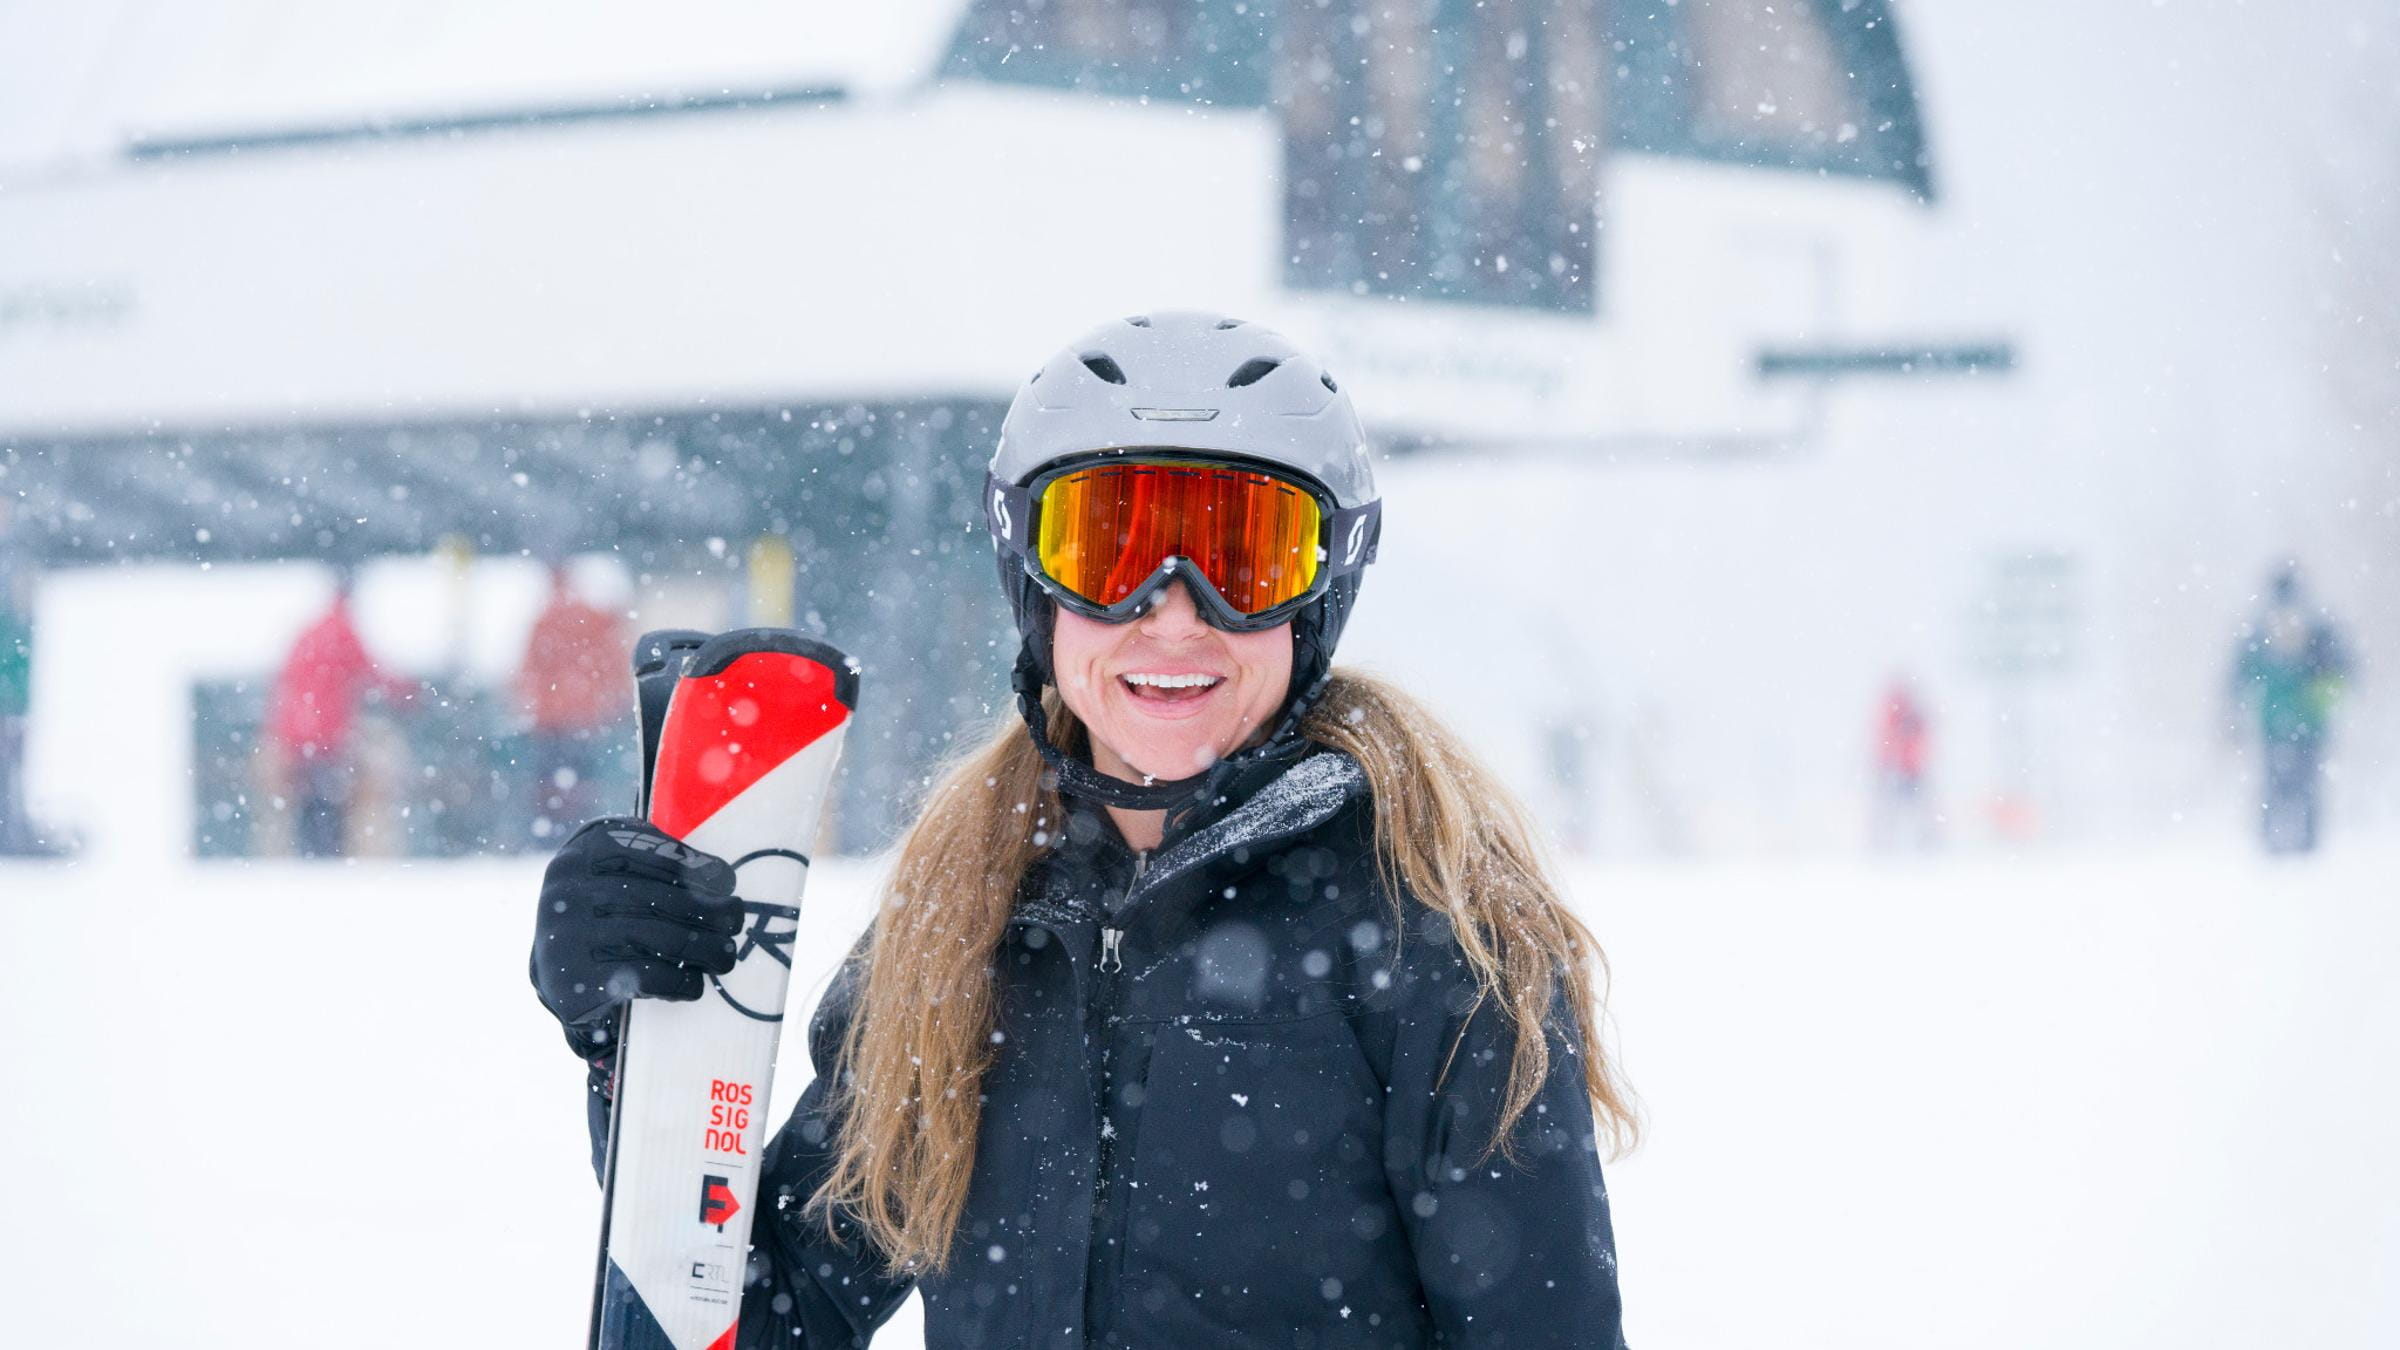 A female guest smiling and holding Rossignol Skis while it snows